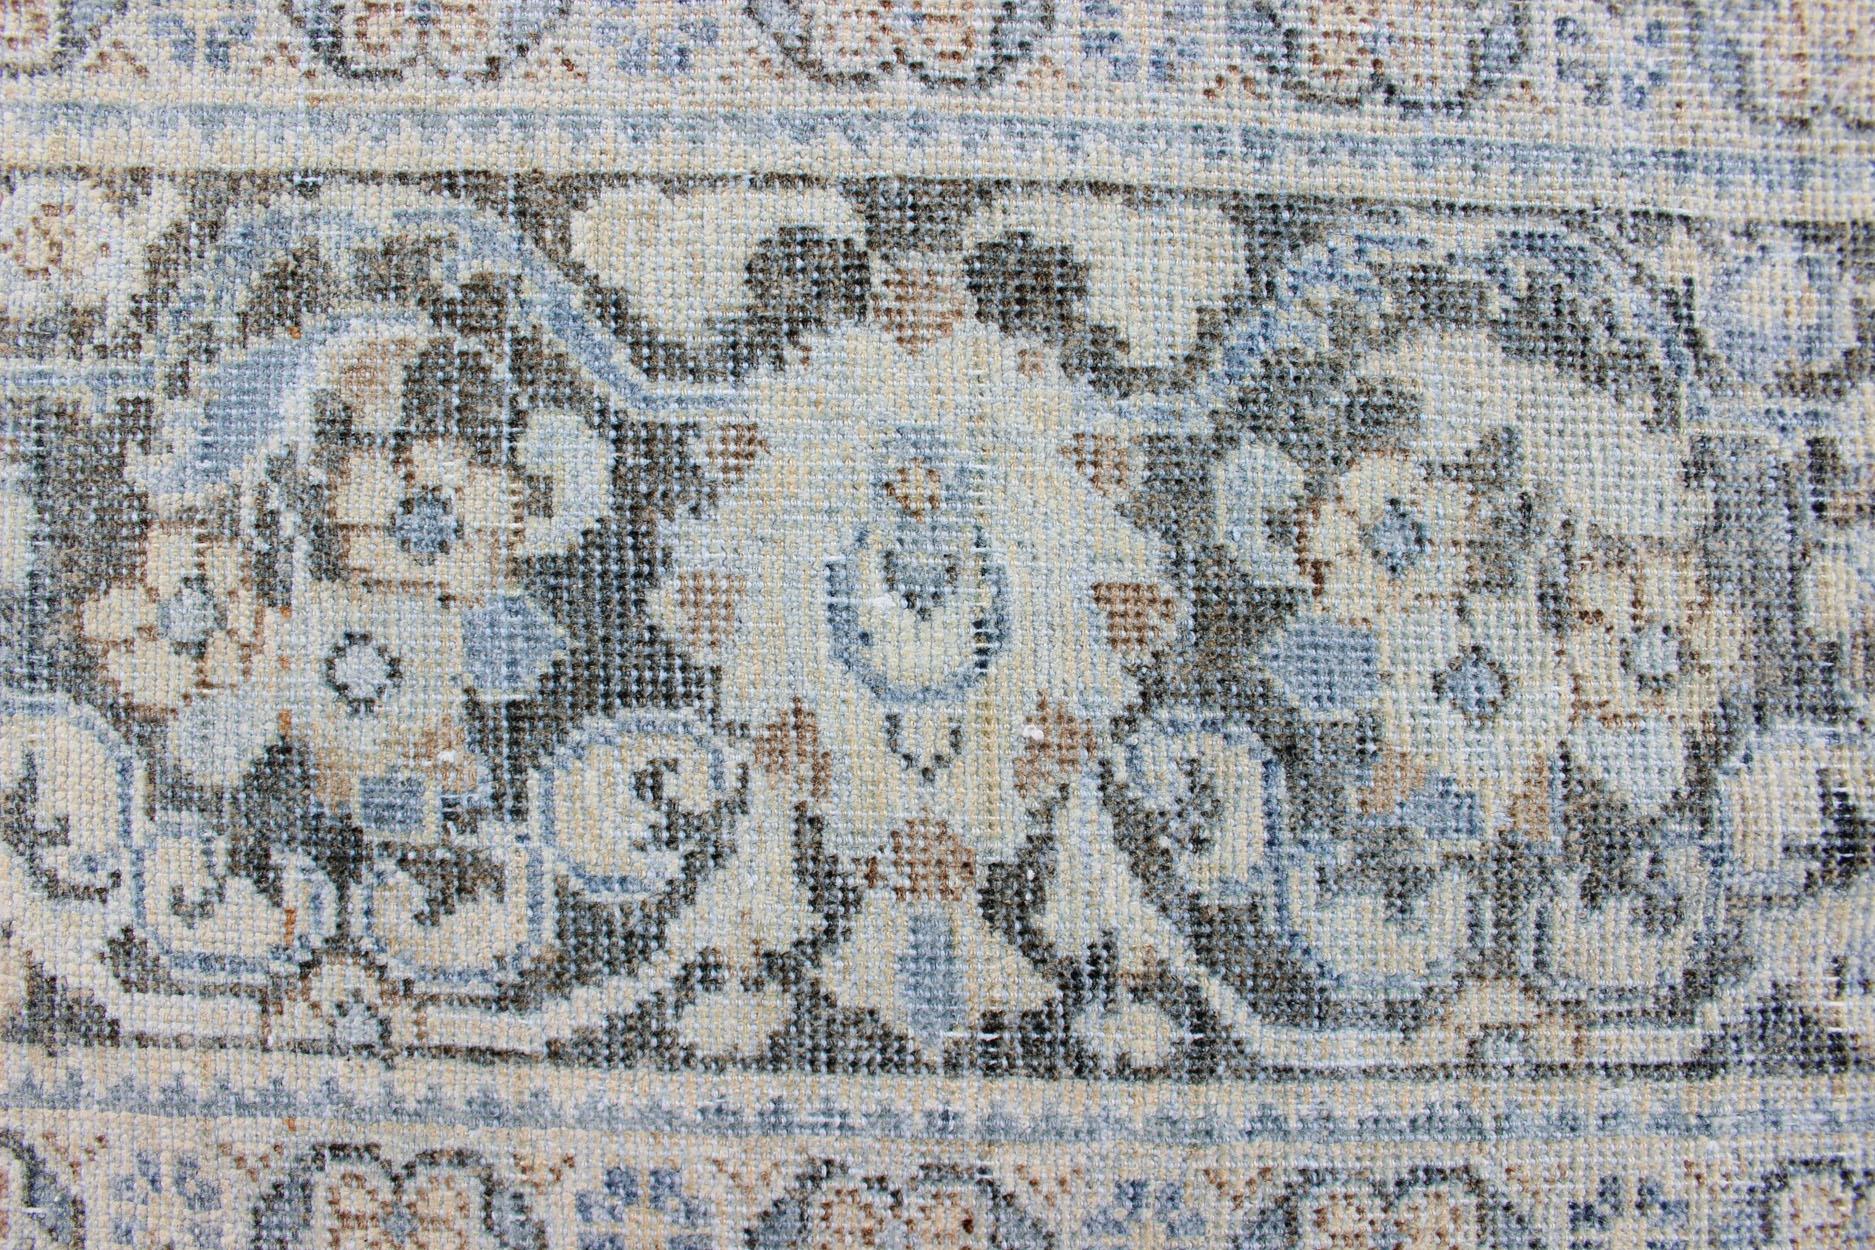 Antique Persian Mahal Rug with Sub Floral Design in Blue, Charcoal & Cream 13